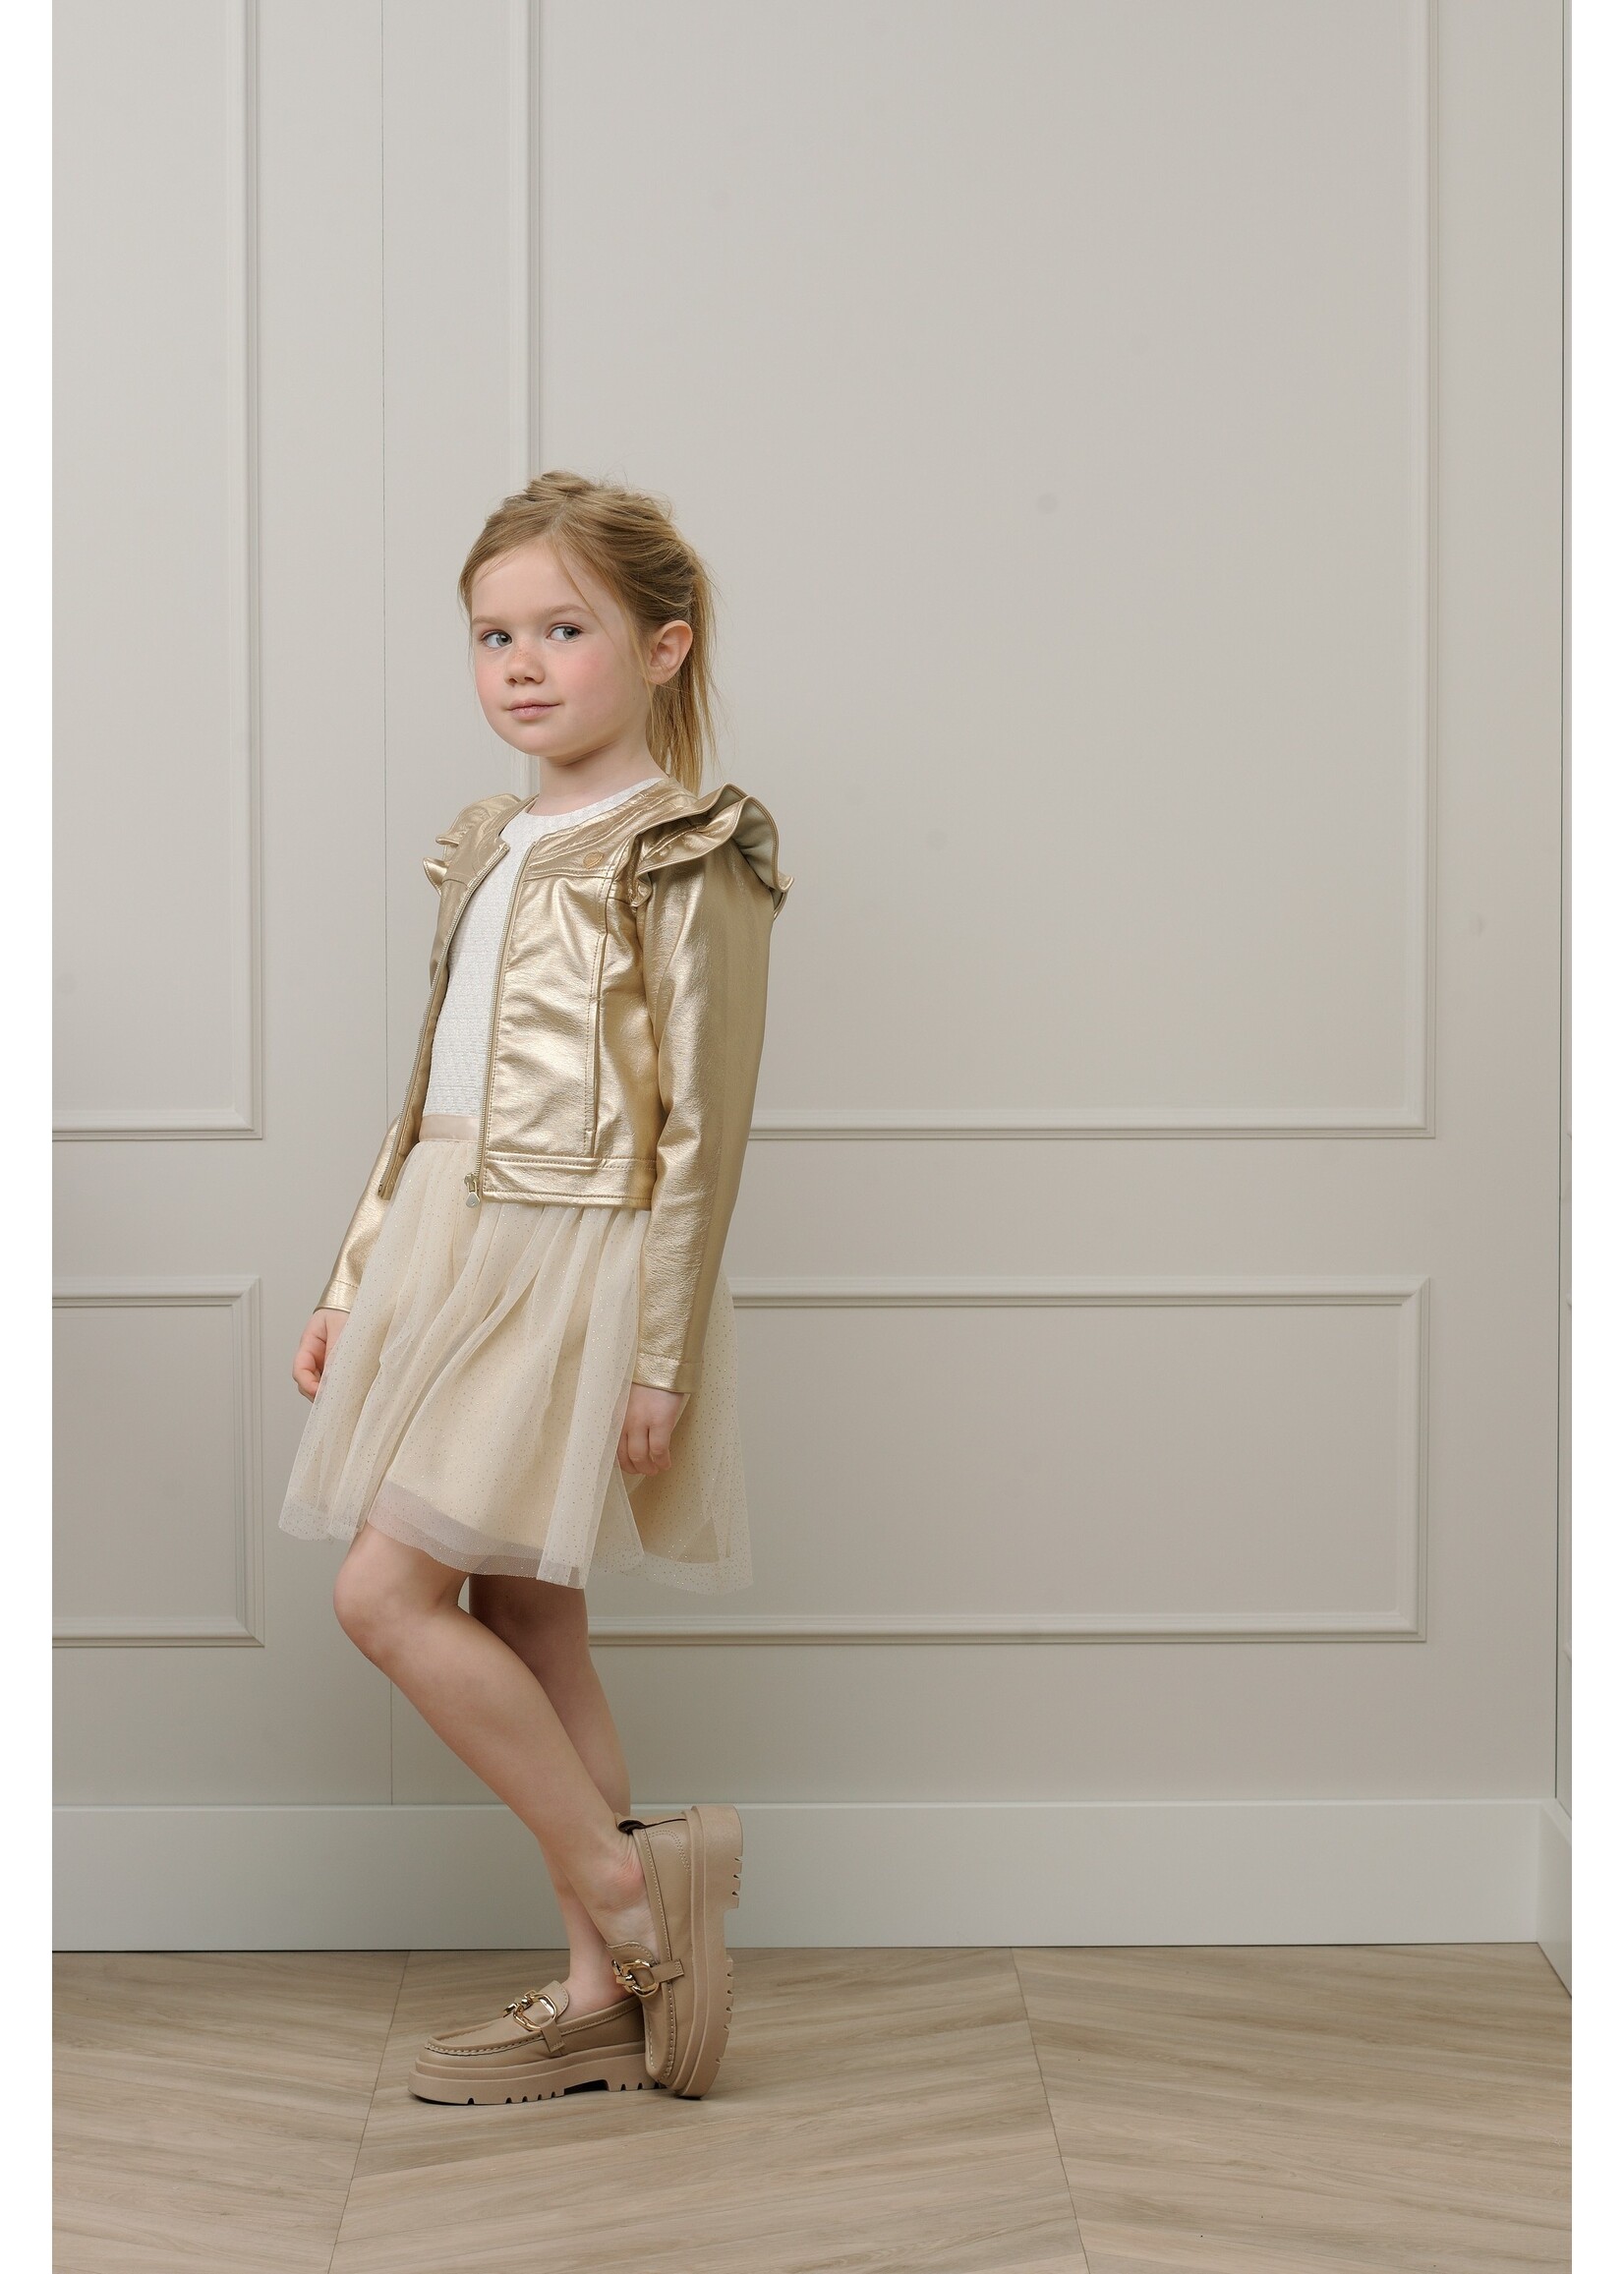 Le Chic Girls Kids C312-5120 ARLYN gold fake leather jacket Champagne